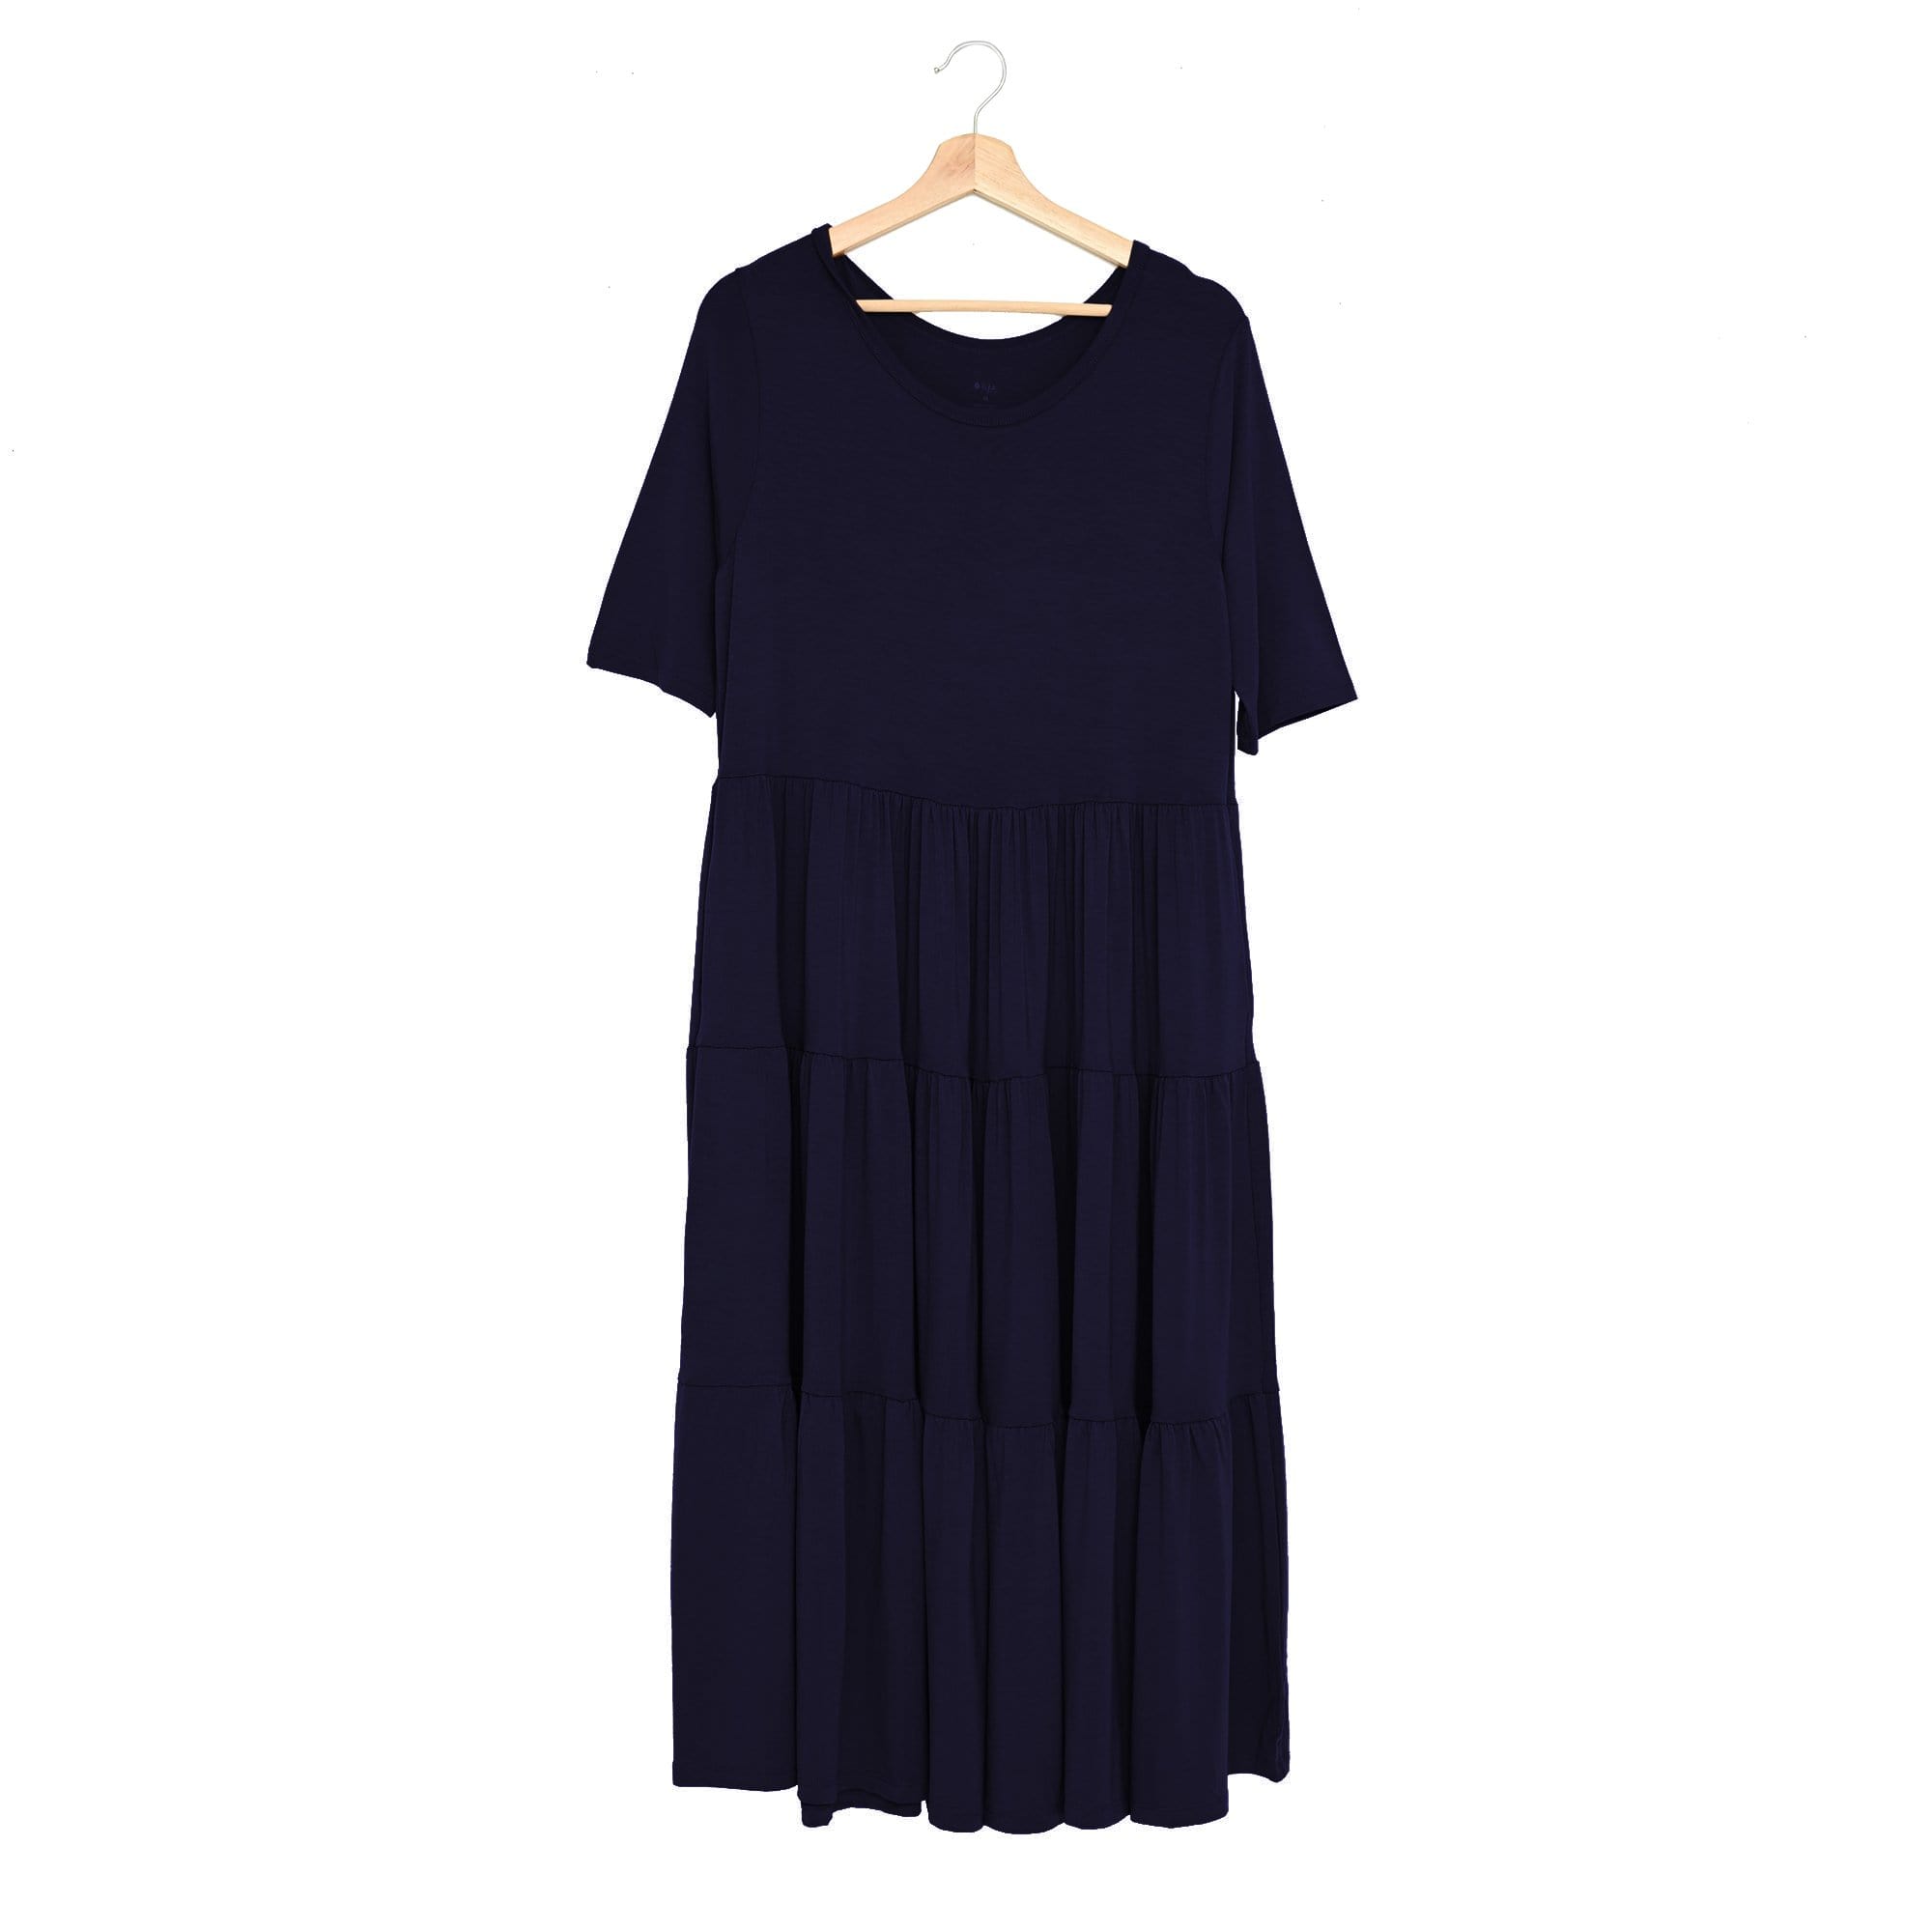 Kyte Baby Women’s Tiered Dress with pockets in Midnight